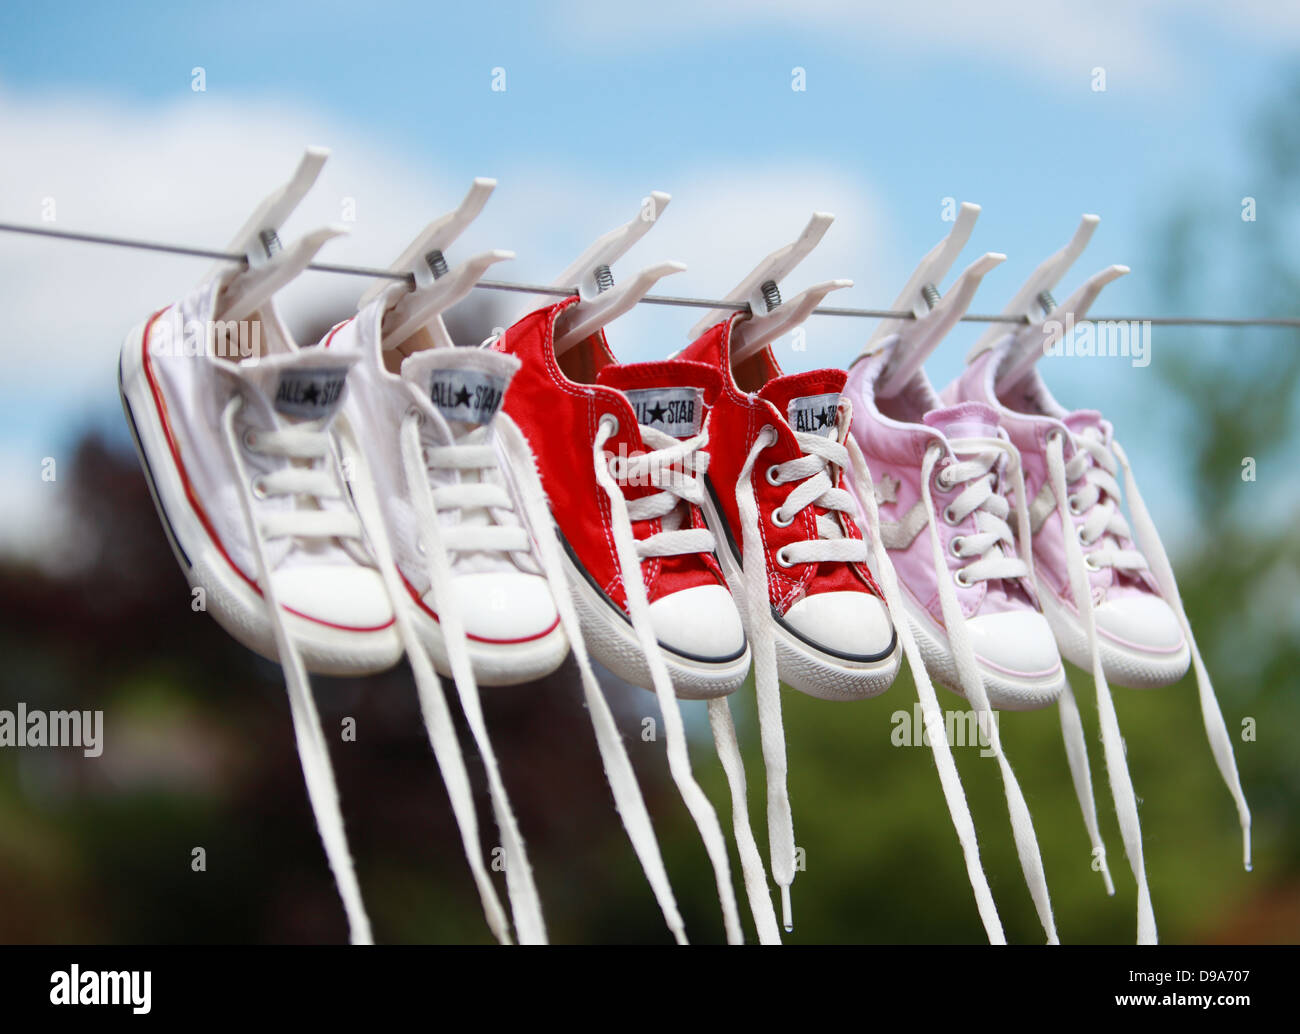 Converse Pumps Trainers on a Washing LIne Stock Photo